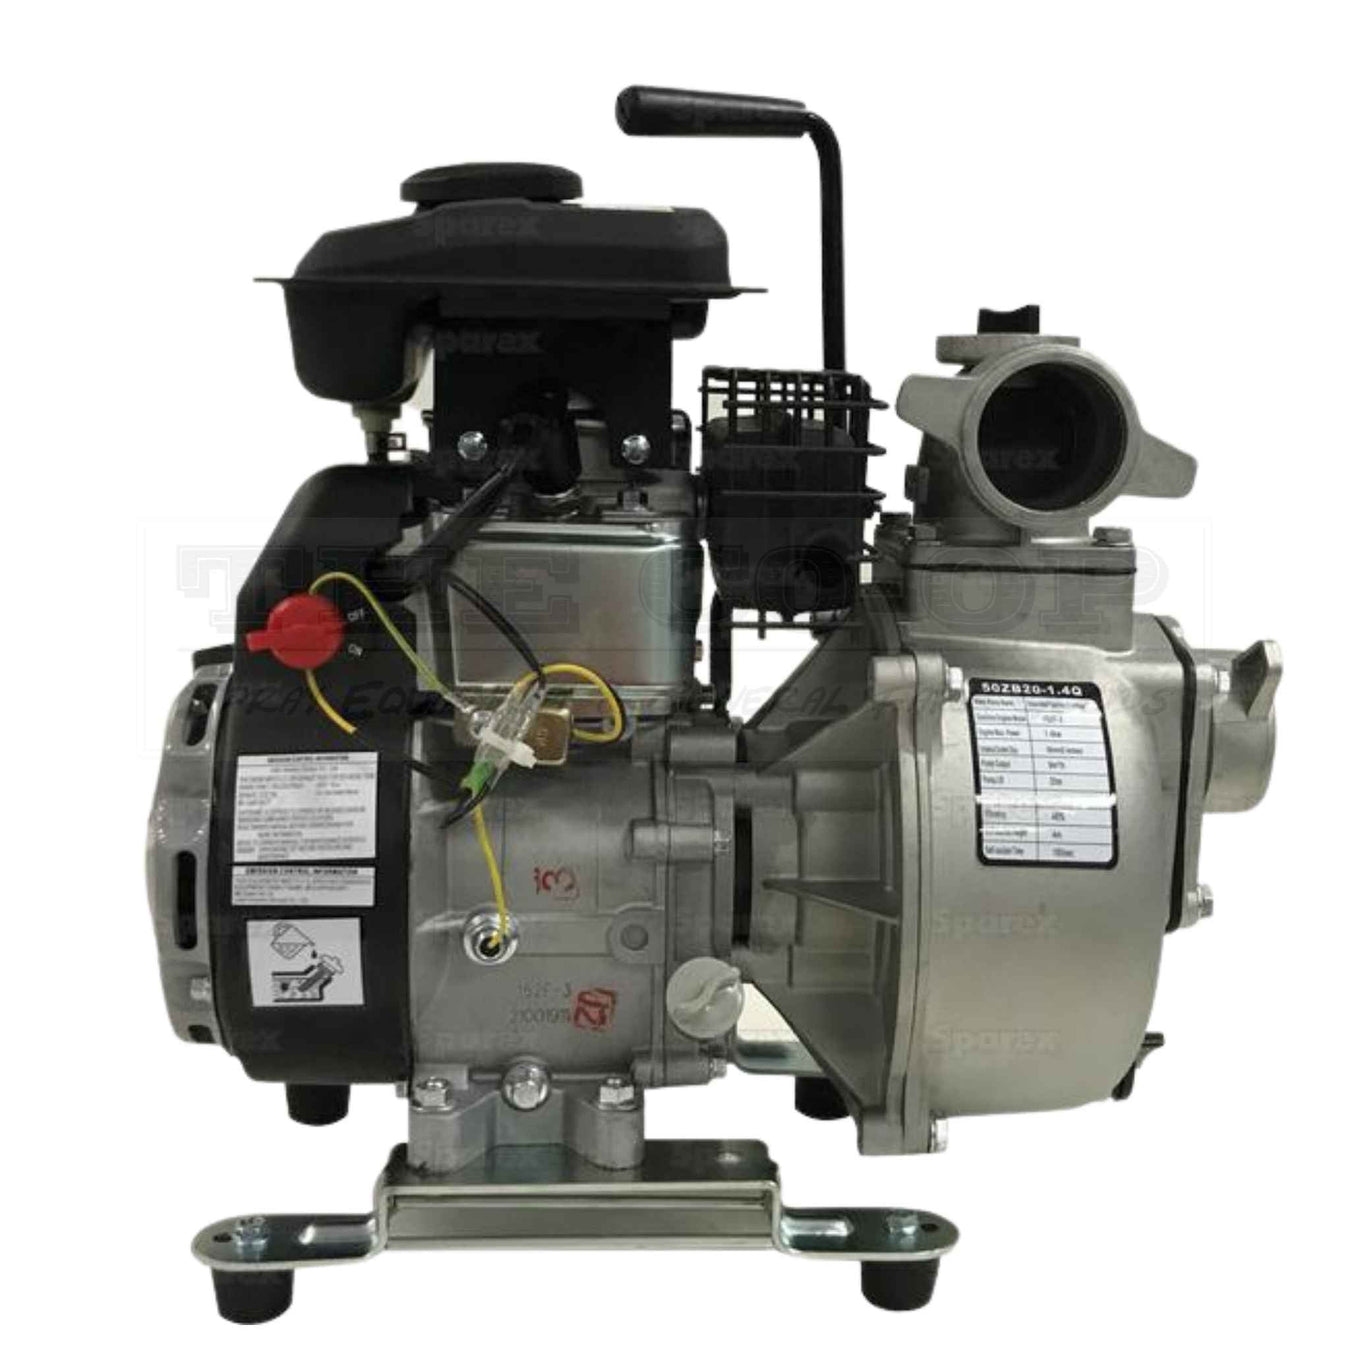 Small & Large Transfer pumps